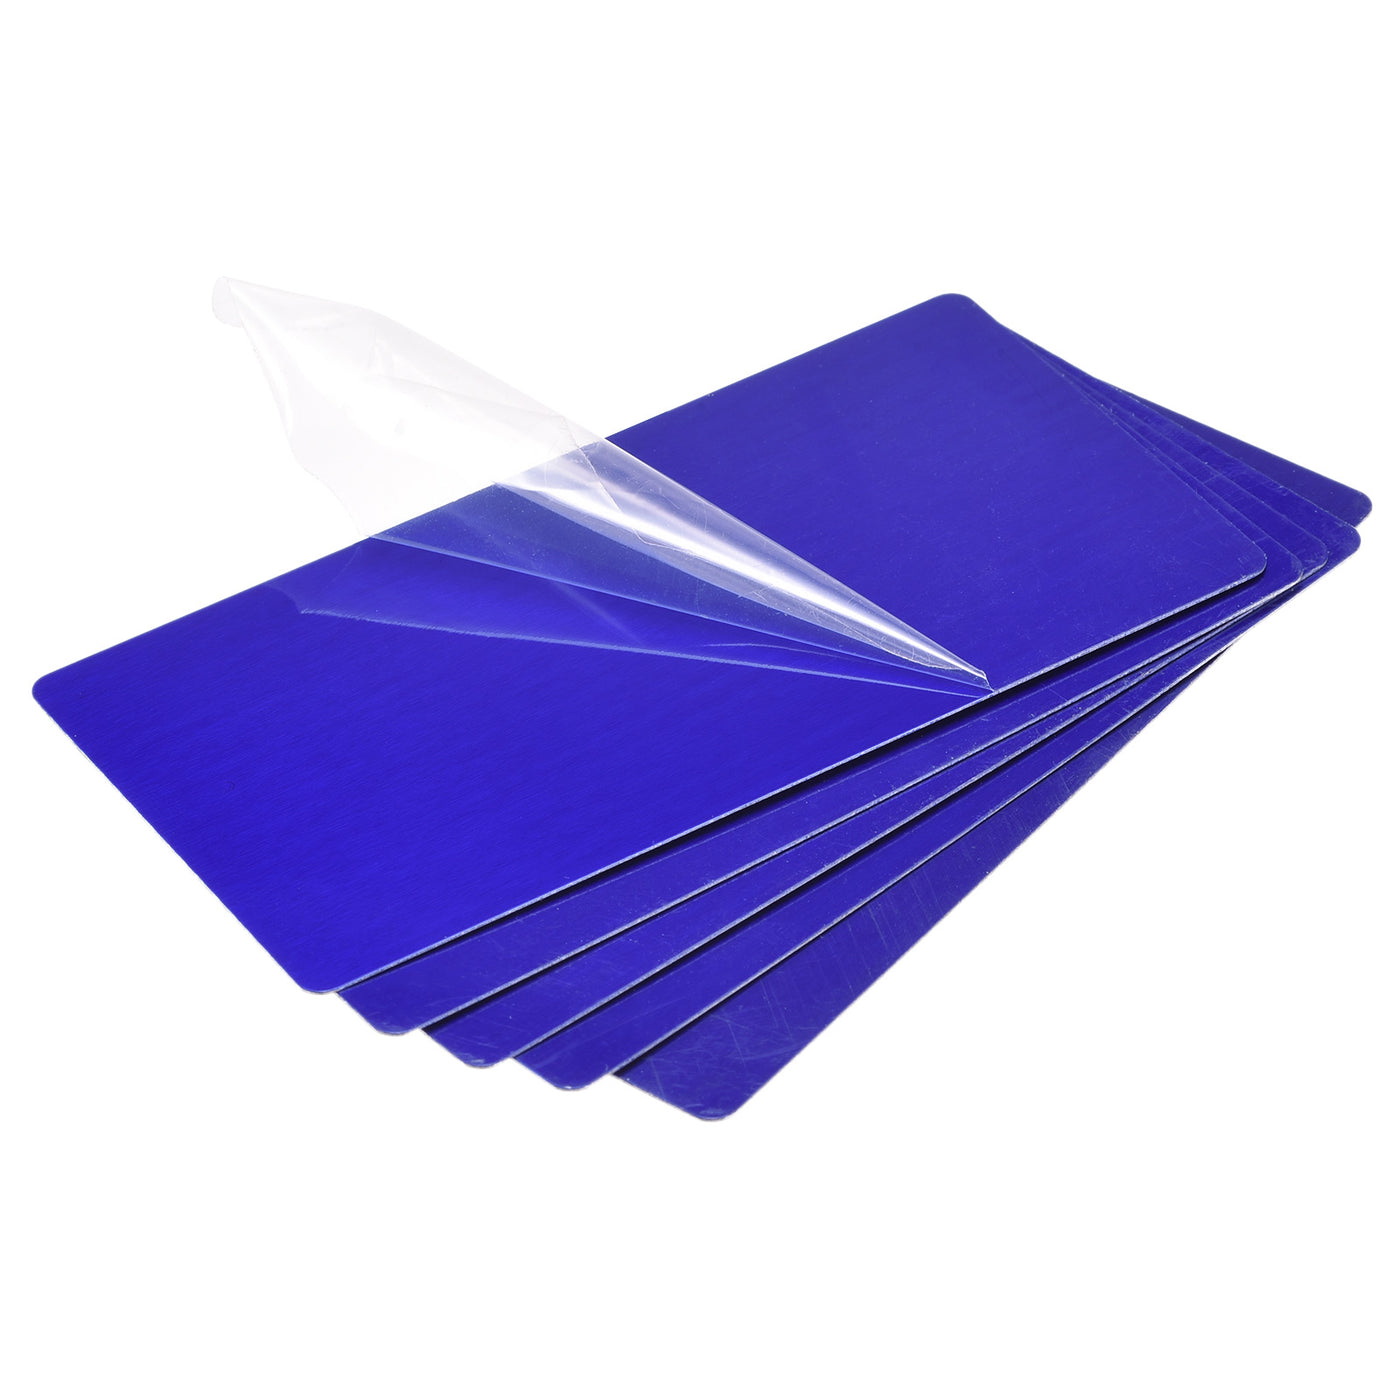 Uxcell Uxcell Blank Metal Card 85mm x 50mm x 0.5mm Painted Aluminum Plate Navy Blue 10 Pcs